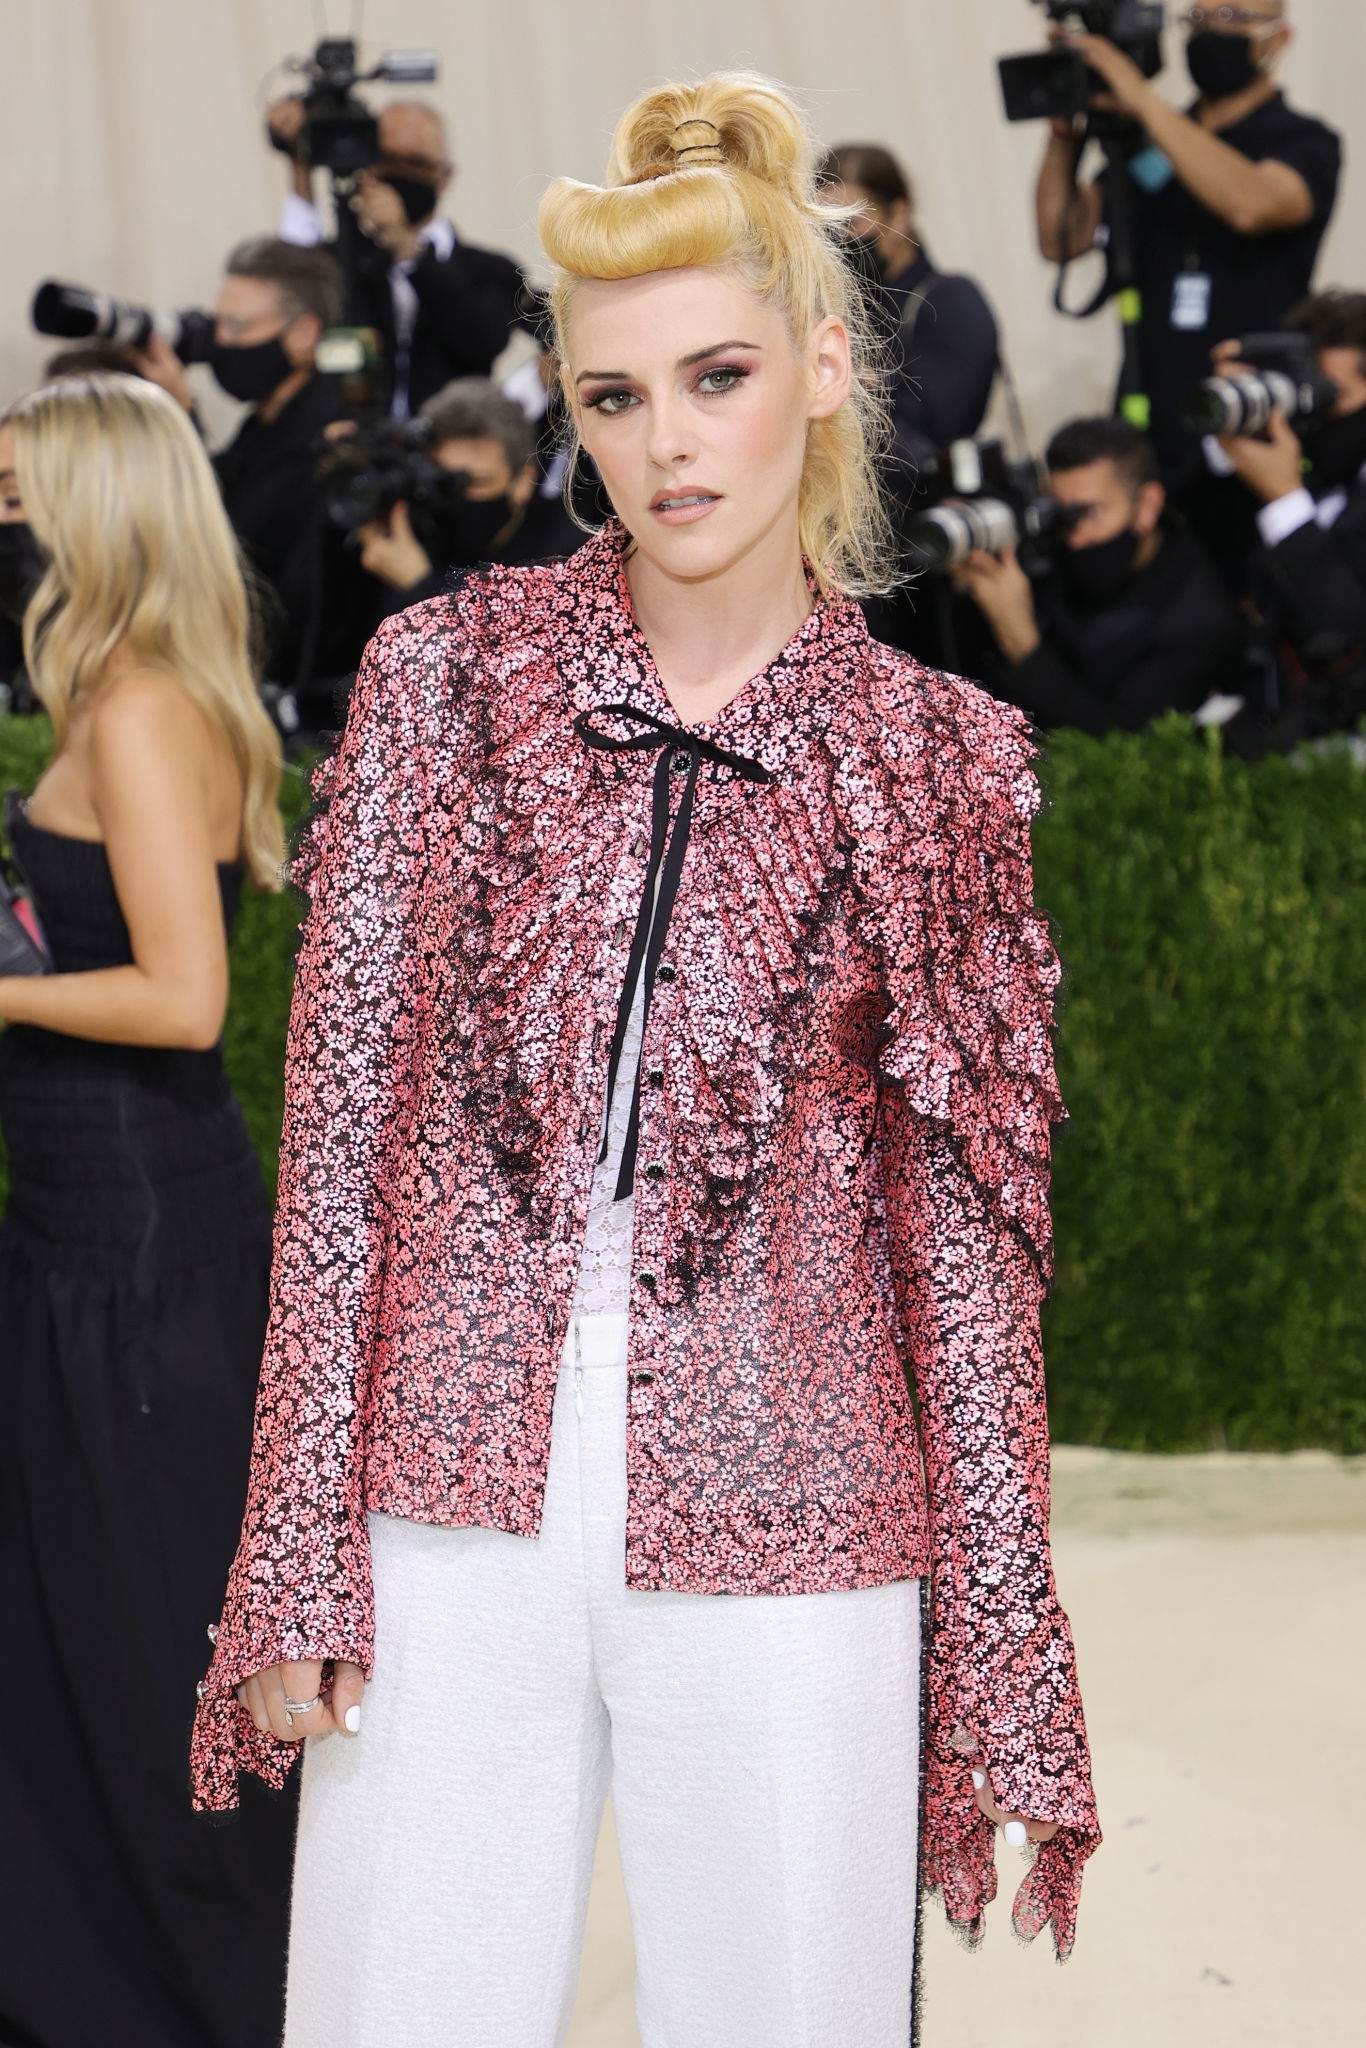 Kristen Stewart at The 2021 Met Gala Celebrating In America: A Lexicon Of Fashion on September 13